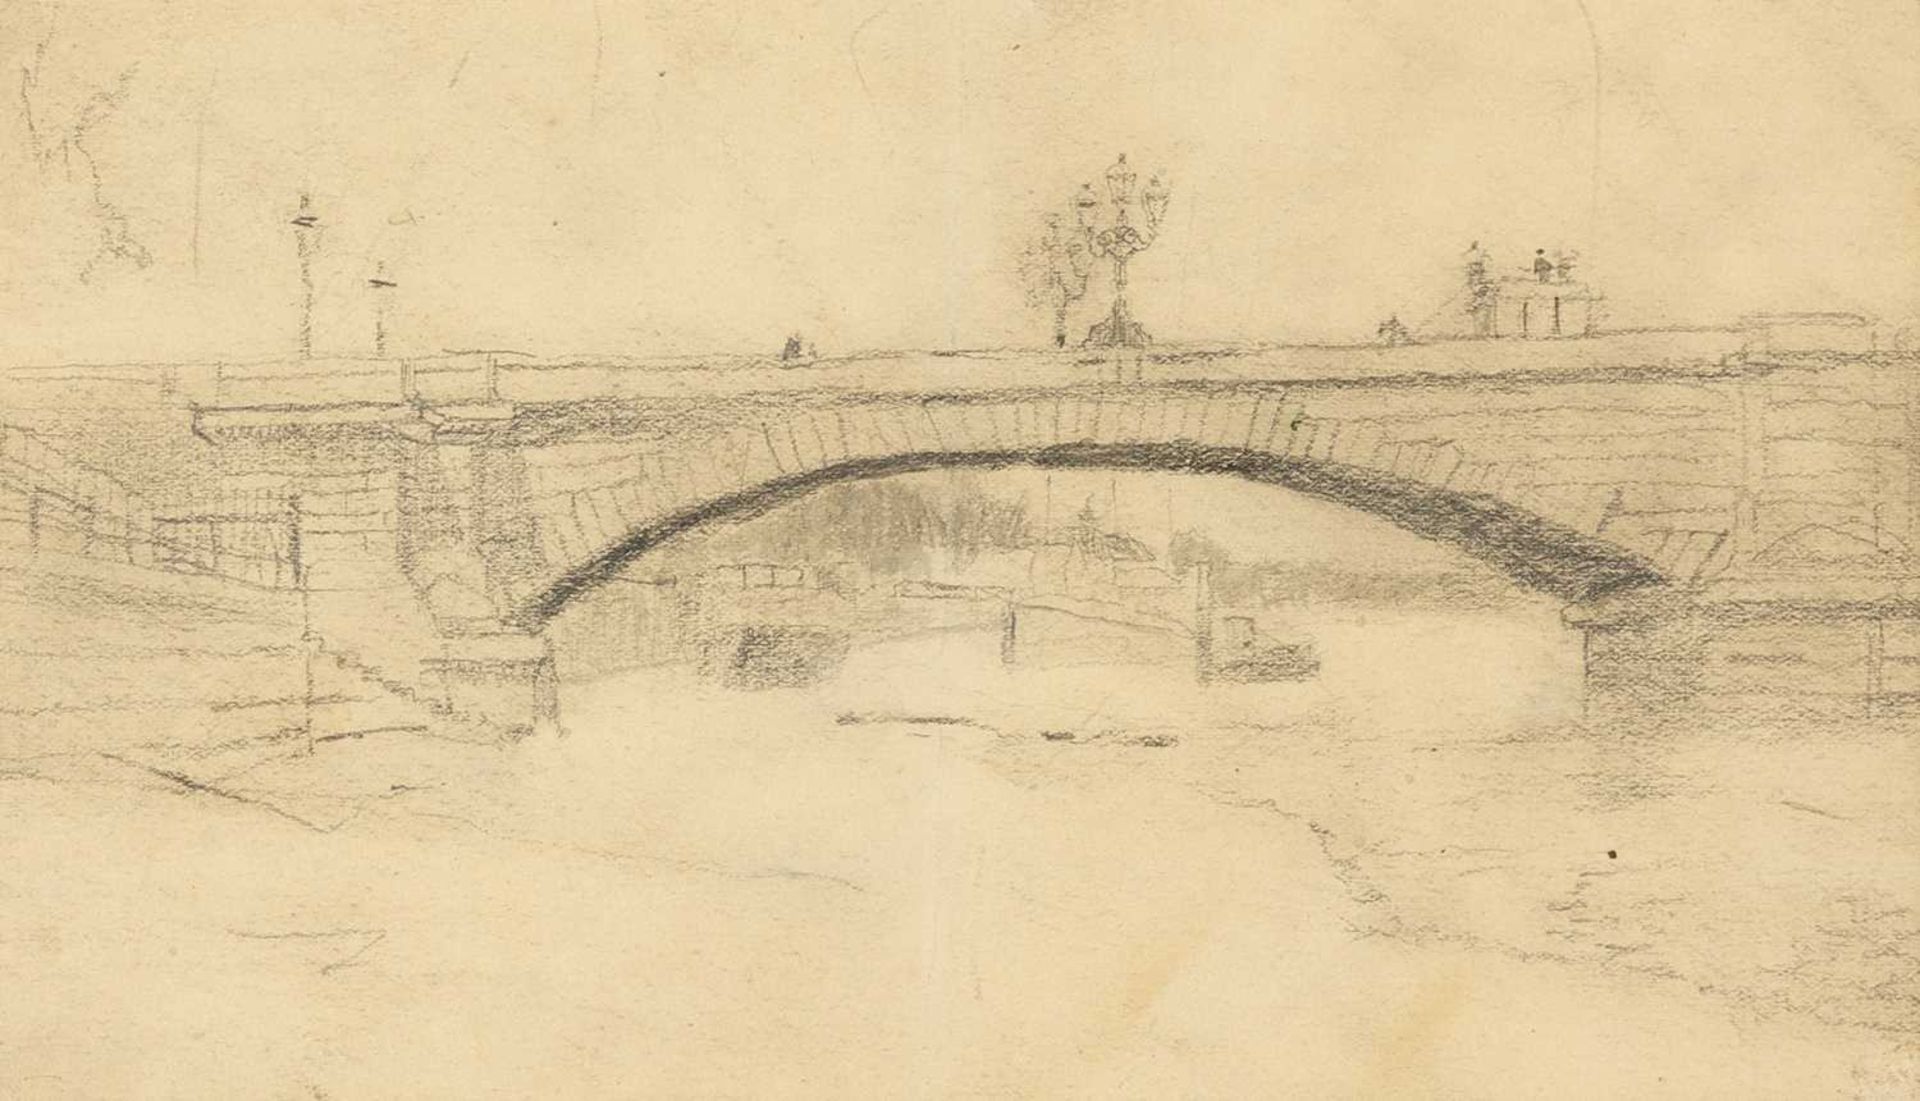 Walter Greaves (1846-1930) Battersea New Bridge inscribed (to reverse) pencil on paper 13 x 22cm.